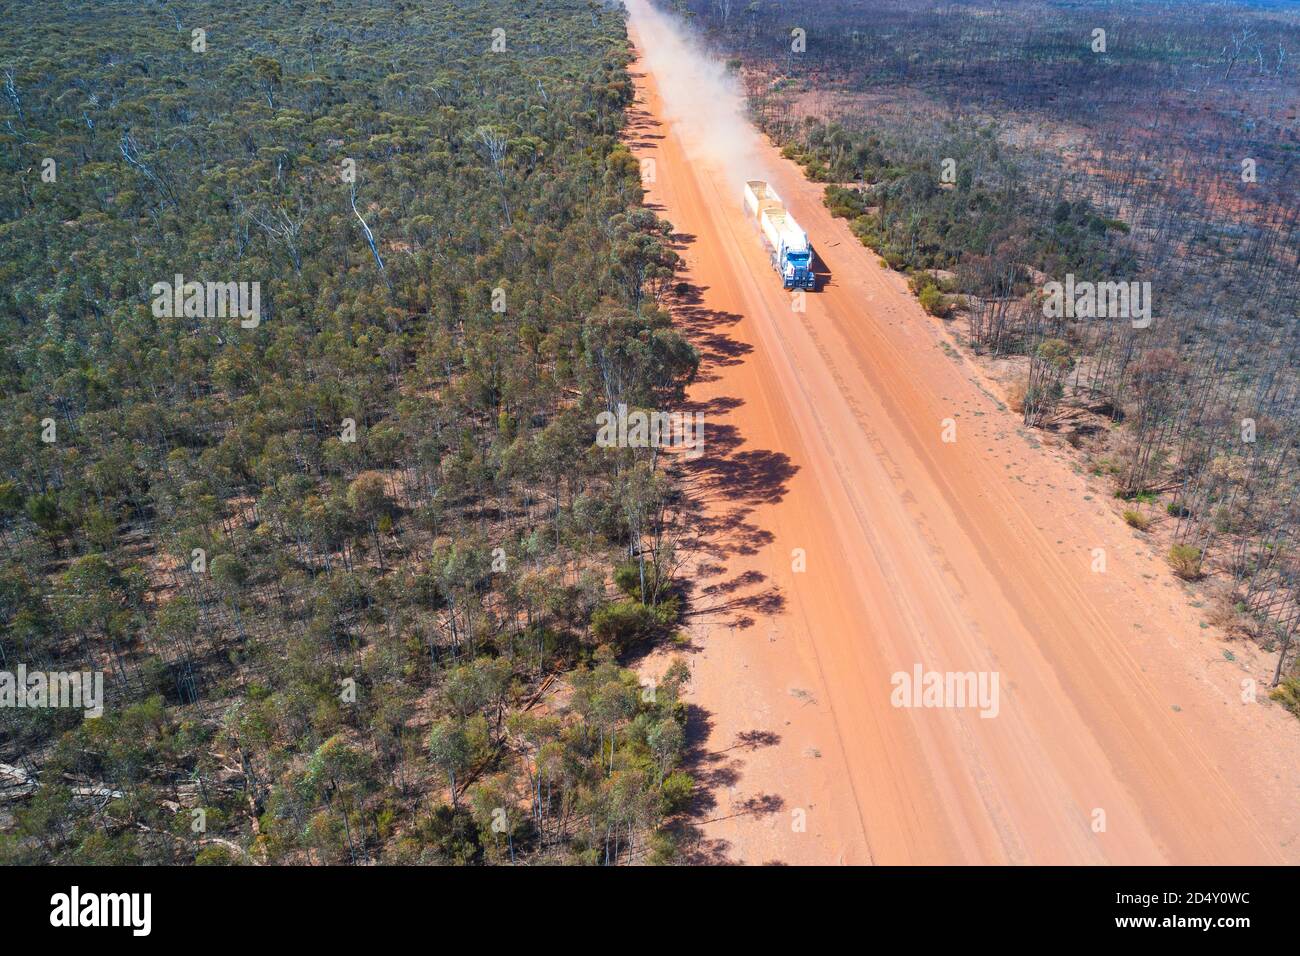 Road train truck on dusty outback road, seen from the air, Hyden Noresman road, Western Australia Stock Photo